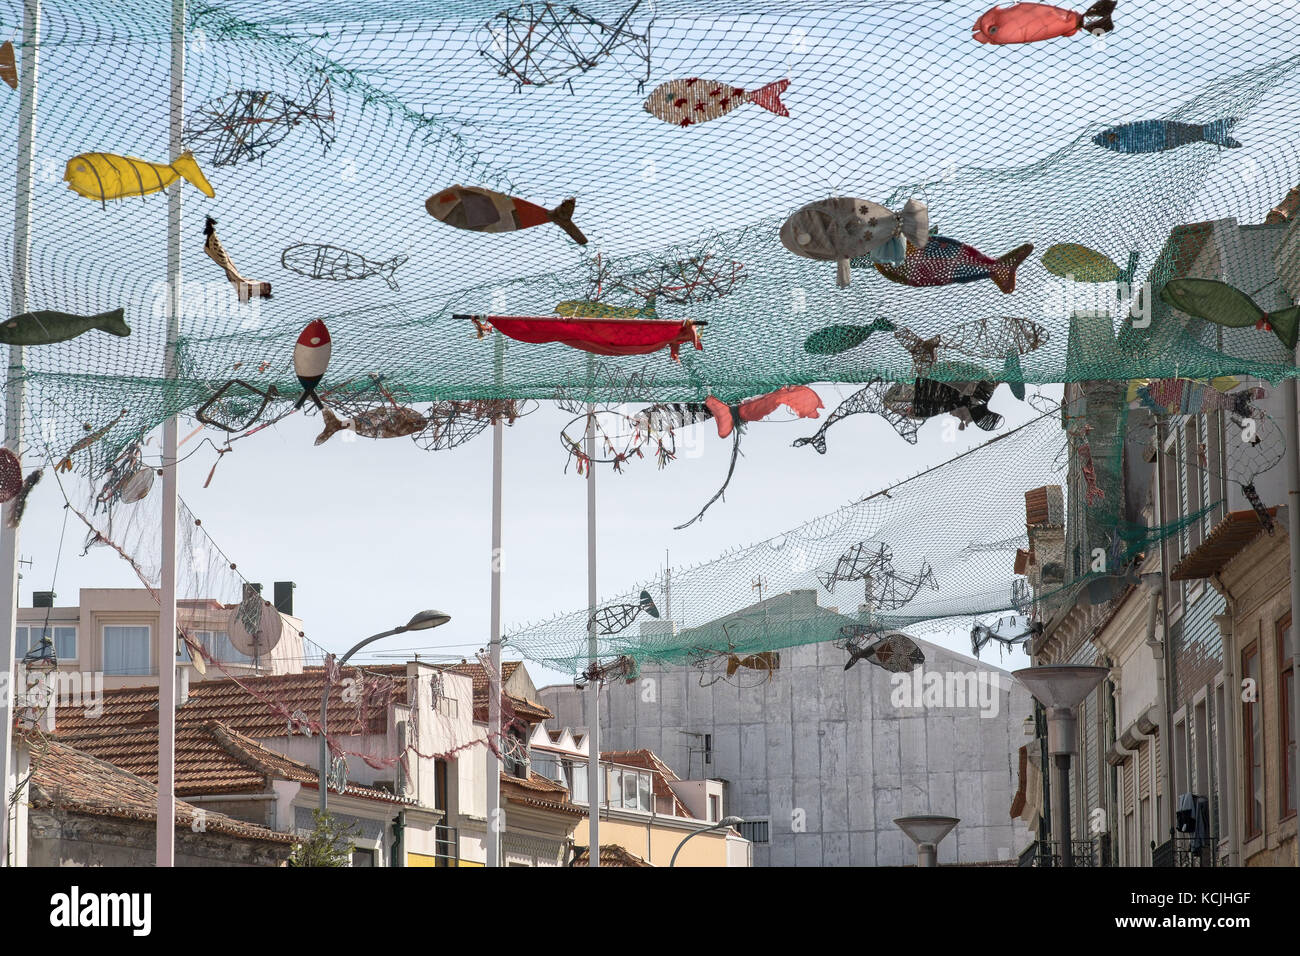 street decoration with fishes in a fishing net Stock Photo - Alamy